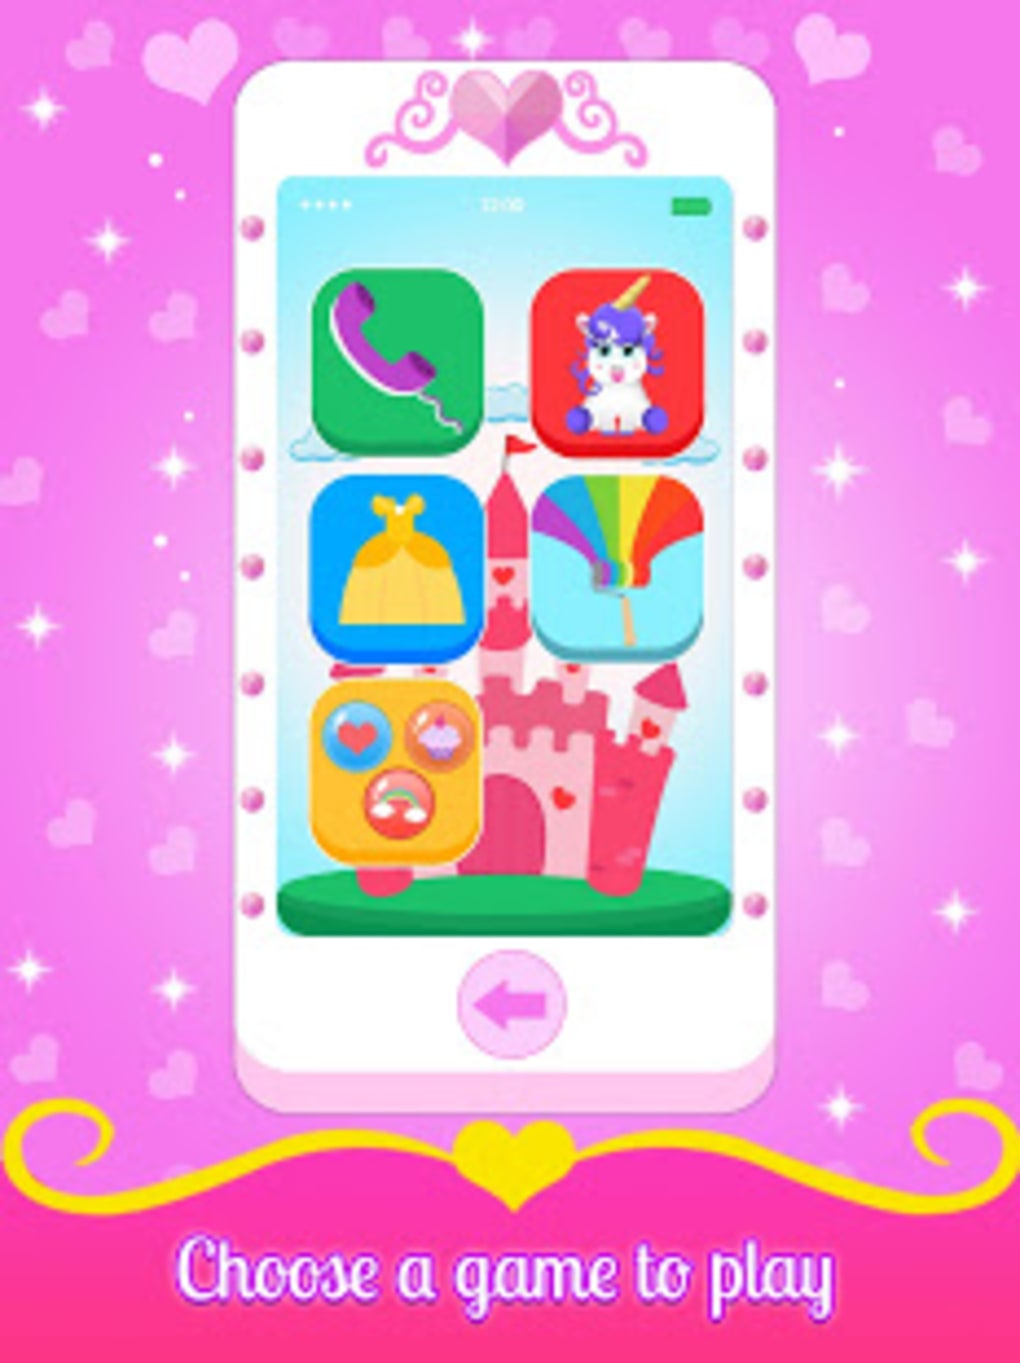 Baby Princess Car phone Toy Game for Android - Download